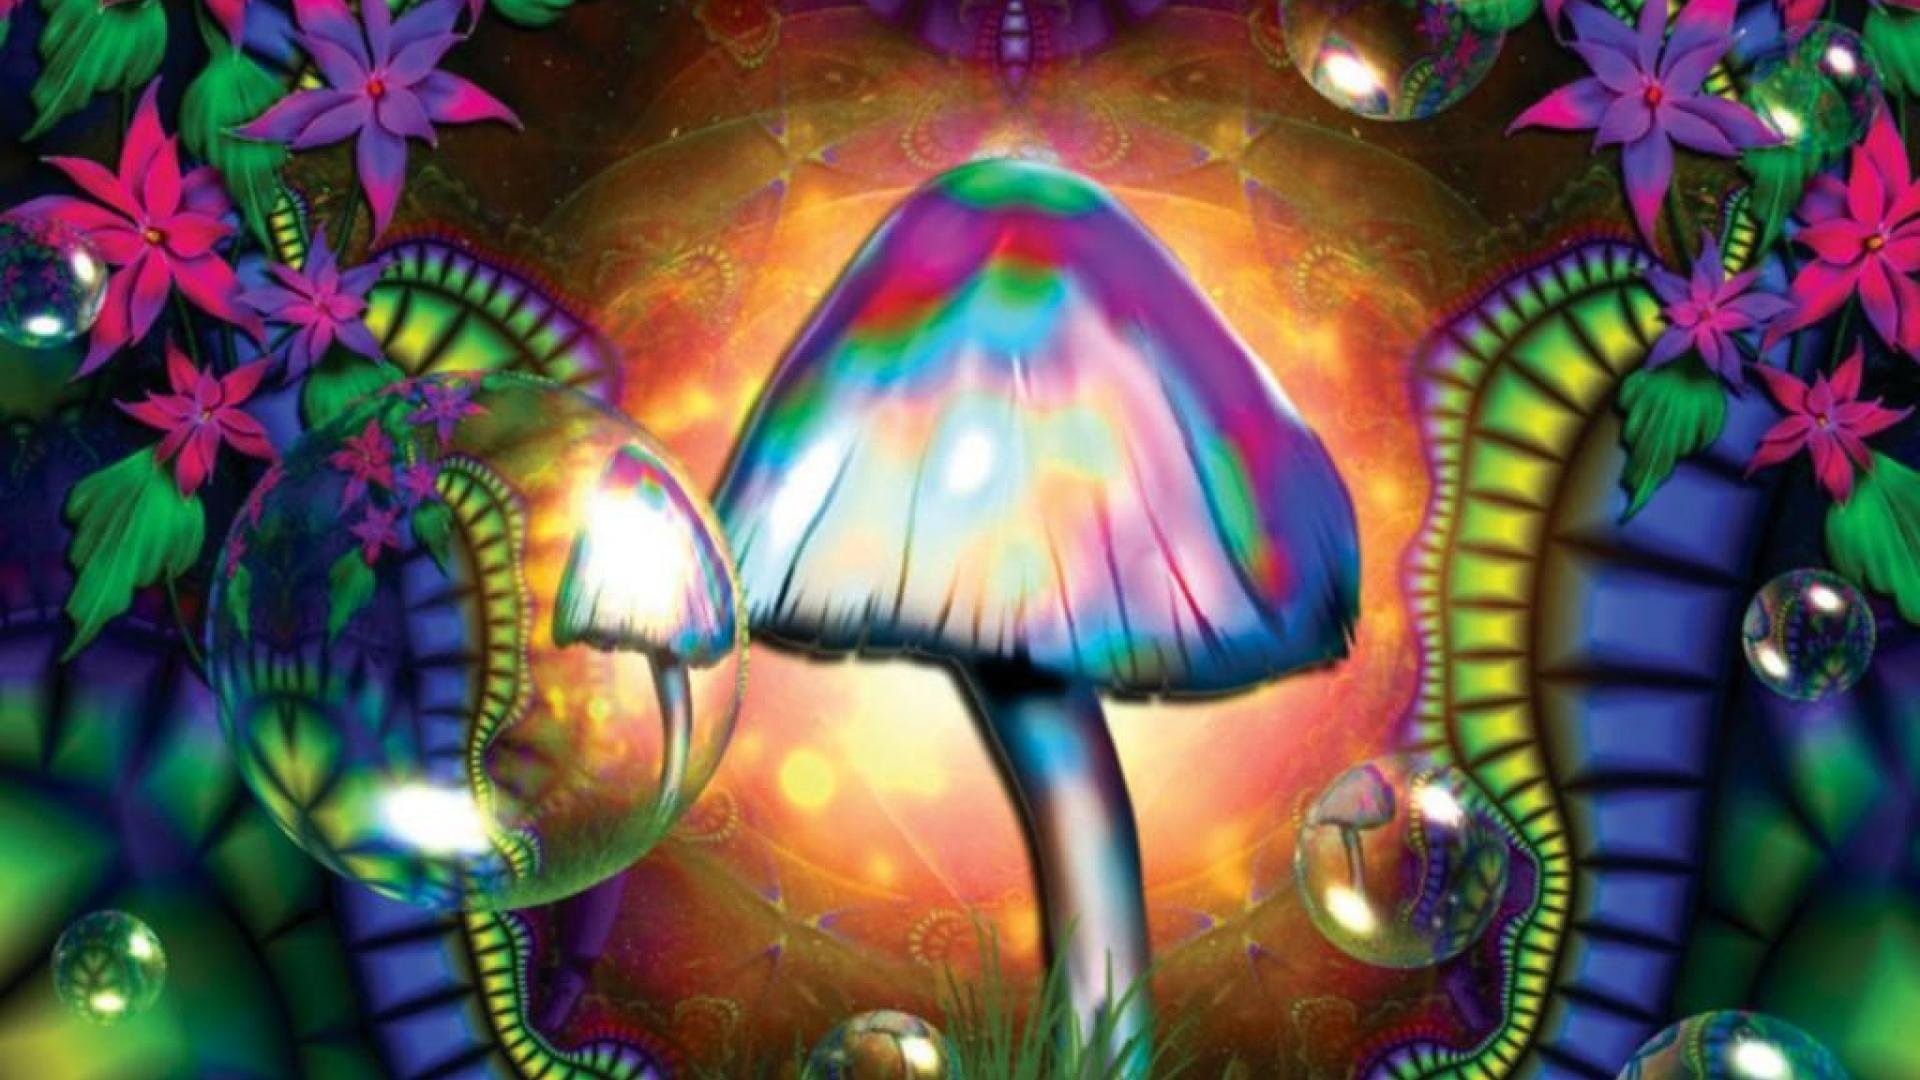 Free download trippy stoner wallpapers images x for your desktop mobile tablet explore psychedelic astronaut wallpapers psychedelic wallpapers astronaut wallpaper psychedelic wallpaper